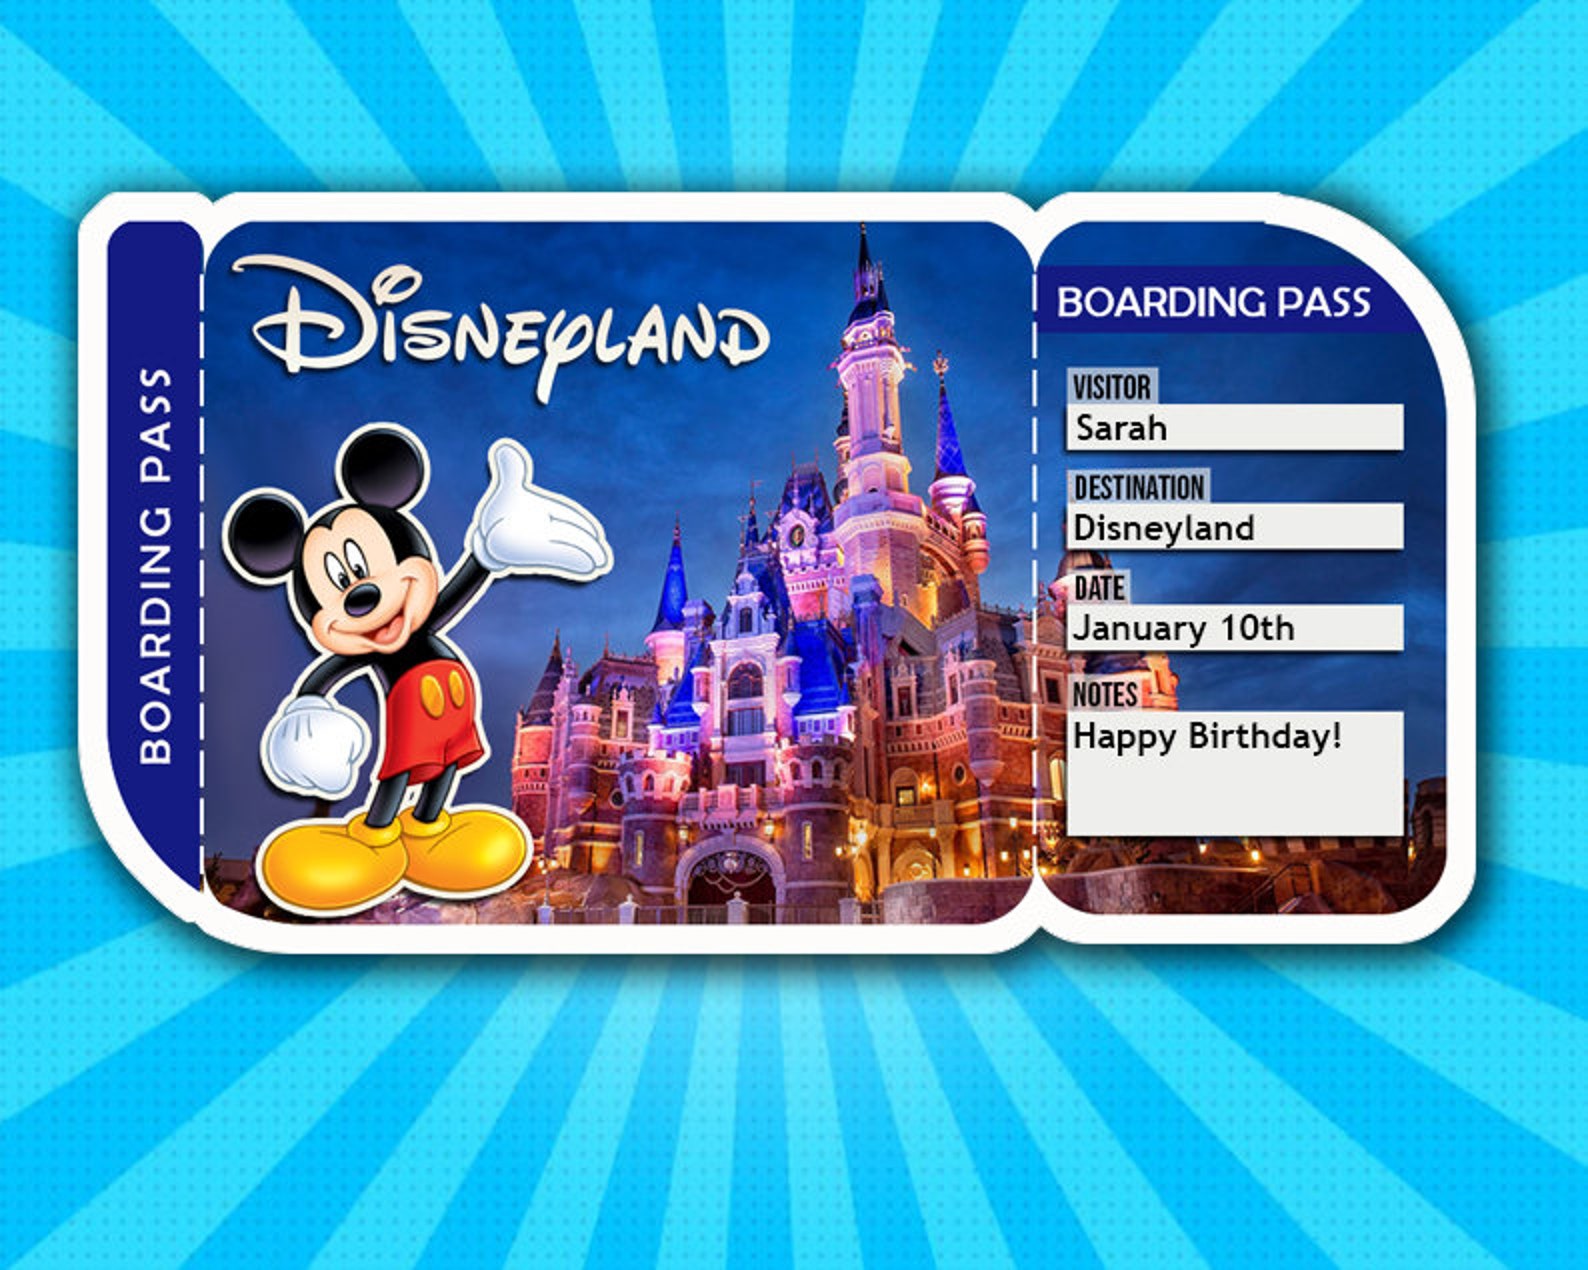 disneyland-printable-ticket-prepare-your-mouseketeers-for-the-trip-of-a